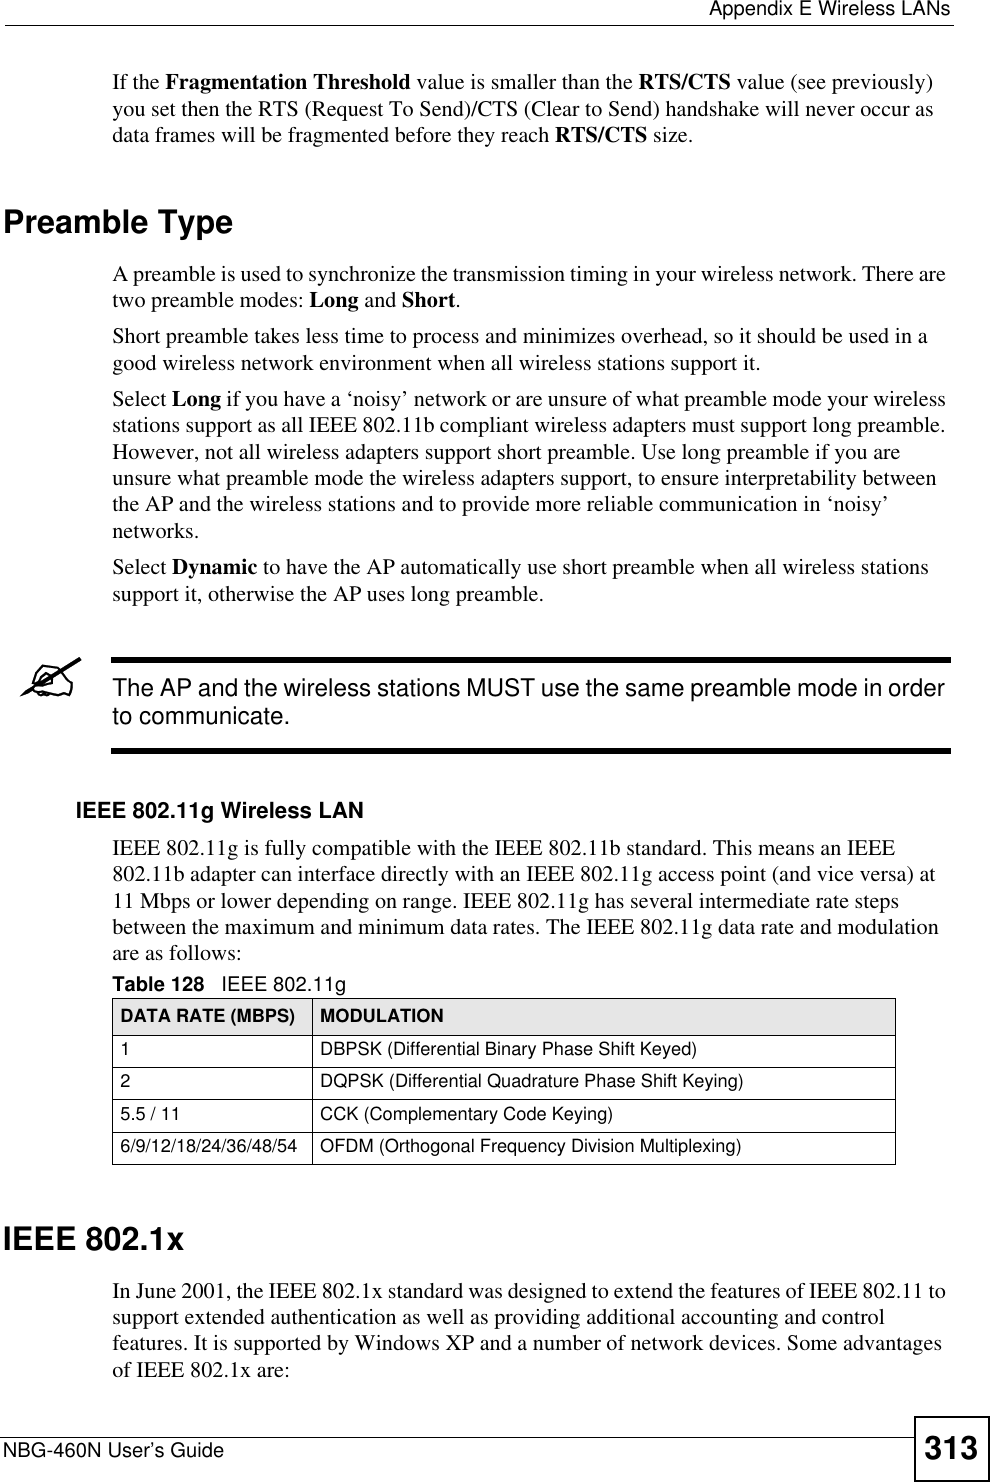  Appendix E Wireless LANsNBG-460N User’s Guide 313If the Fragmentation Threshold value is smaller than the RTS/CTS value (see previously) you set then the RTS (Request To Send)/CTS (Clear to Send) handshake will never occur as data frames will be fragmented before they reach RTS/CTS size.Preamble TypeA preamble is used to synchronize the transmission timing in your wireless network. There are two preamble modes: Long and Short.Short preamble takes less time to process and minimizes overhead, so it should be used in a good wireless network environment when all wireless stations support it. Select Long if you have a ‘noisy’ network or are unsure of what preamble mode your wireless stations support as all IEEE 802.11b compliant wireless adapters must support long preamble. However, not all wireless adapters support short preamble. Use long preamble if you are unsure what preamble mode the wireless adapters support, to ensure interpretability between the AP and the wireless stations and to provide more reliable communication in ‘noisy’ networks. Select Dynamic to have the AP automatically use short preamble when all wireless stations support it, otherwise the AP uses long preamble.&quot;The AP and the wireless stations MUST use the same preamble mode in order to communicate.IEEE 802.11g Wireless LANIEEE 802.11g is fully compatible with the IEEE 802.11b standard. This means an IEEE 802.11b adapter can interface directly with an IEEE 802.11g access point (and vice versa) at 11 Mbps or lower depending on range. IEEE 802.11g has several intermediate rate steps between the maximum and minimum data rates. The IEEE 802.11g data rate and modulation are as follows:IEEE 802.1xIn June 2001, the IEEE 802.1x standard was designed to extend the features of IEEE 802.11 to support extended authentication as well as providing additional accounting and control features. It is supported by Windows XP and a number of network devices. Some advantages of IEEE 802.1x are:Table 128   IEEE 802.11gDATA RATE (MBPS) MODULATION1 DBPSK (Differential Binary Phase Shift Keyed)2 DQPSK (Differential Quadrature Phase Shift Keying)5.5 / 11 CCK (Complementary Code Keying) 6/9/12/18/24/36/48/54 OFDM (Orthogonal Frequency Division Multiplexing) 